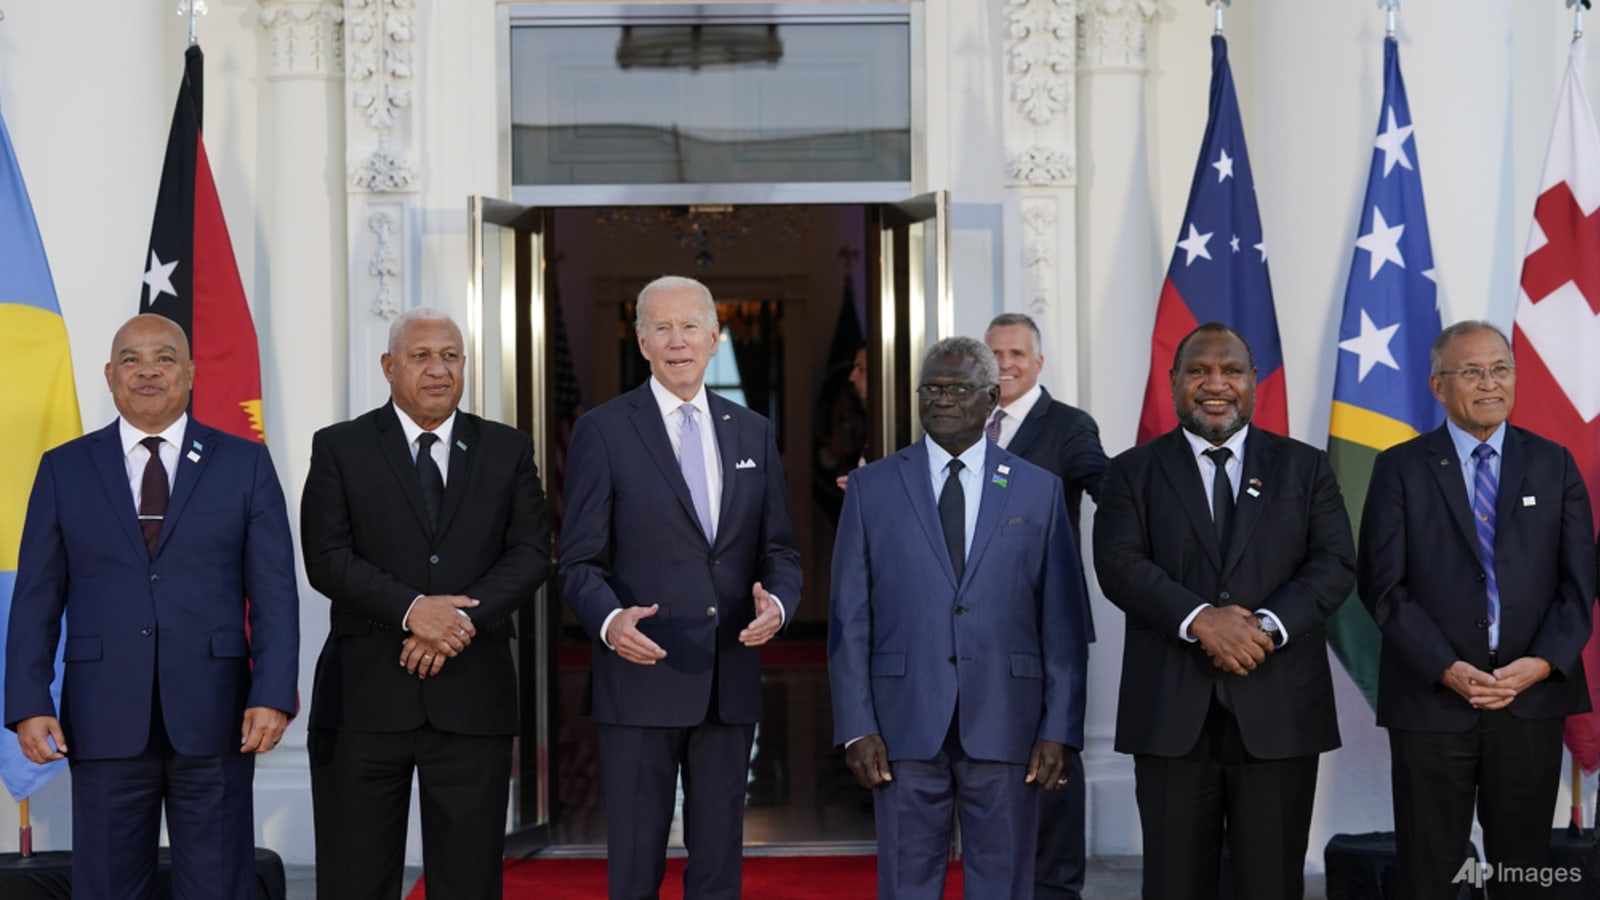 us,-china-vie-for-influence-over-pacific-island-nations-including-papua-new-guinea